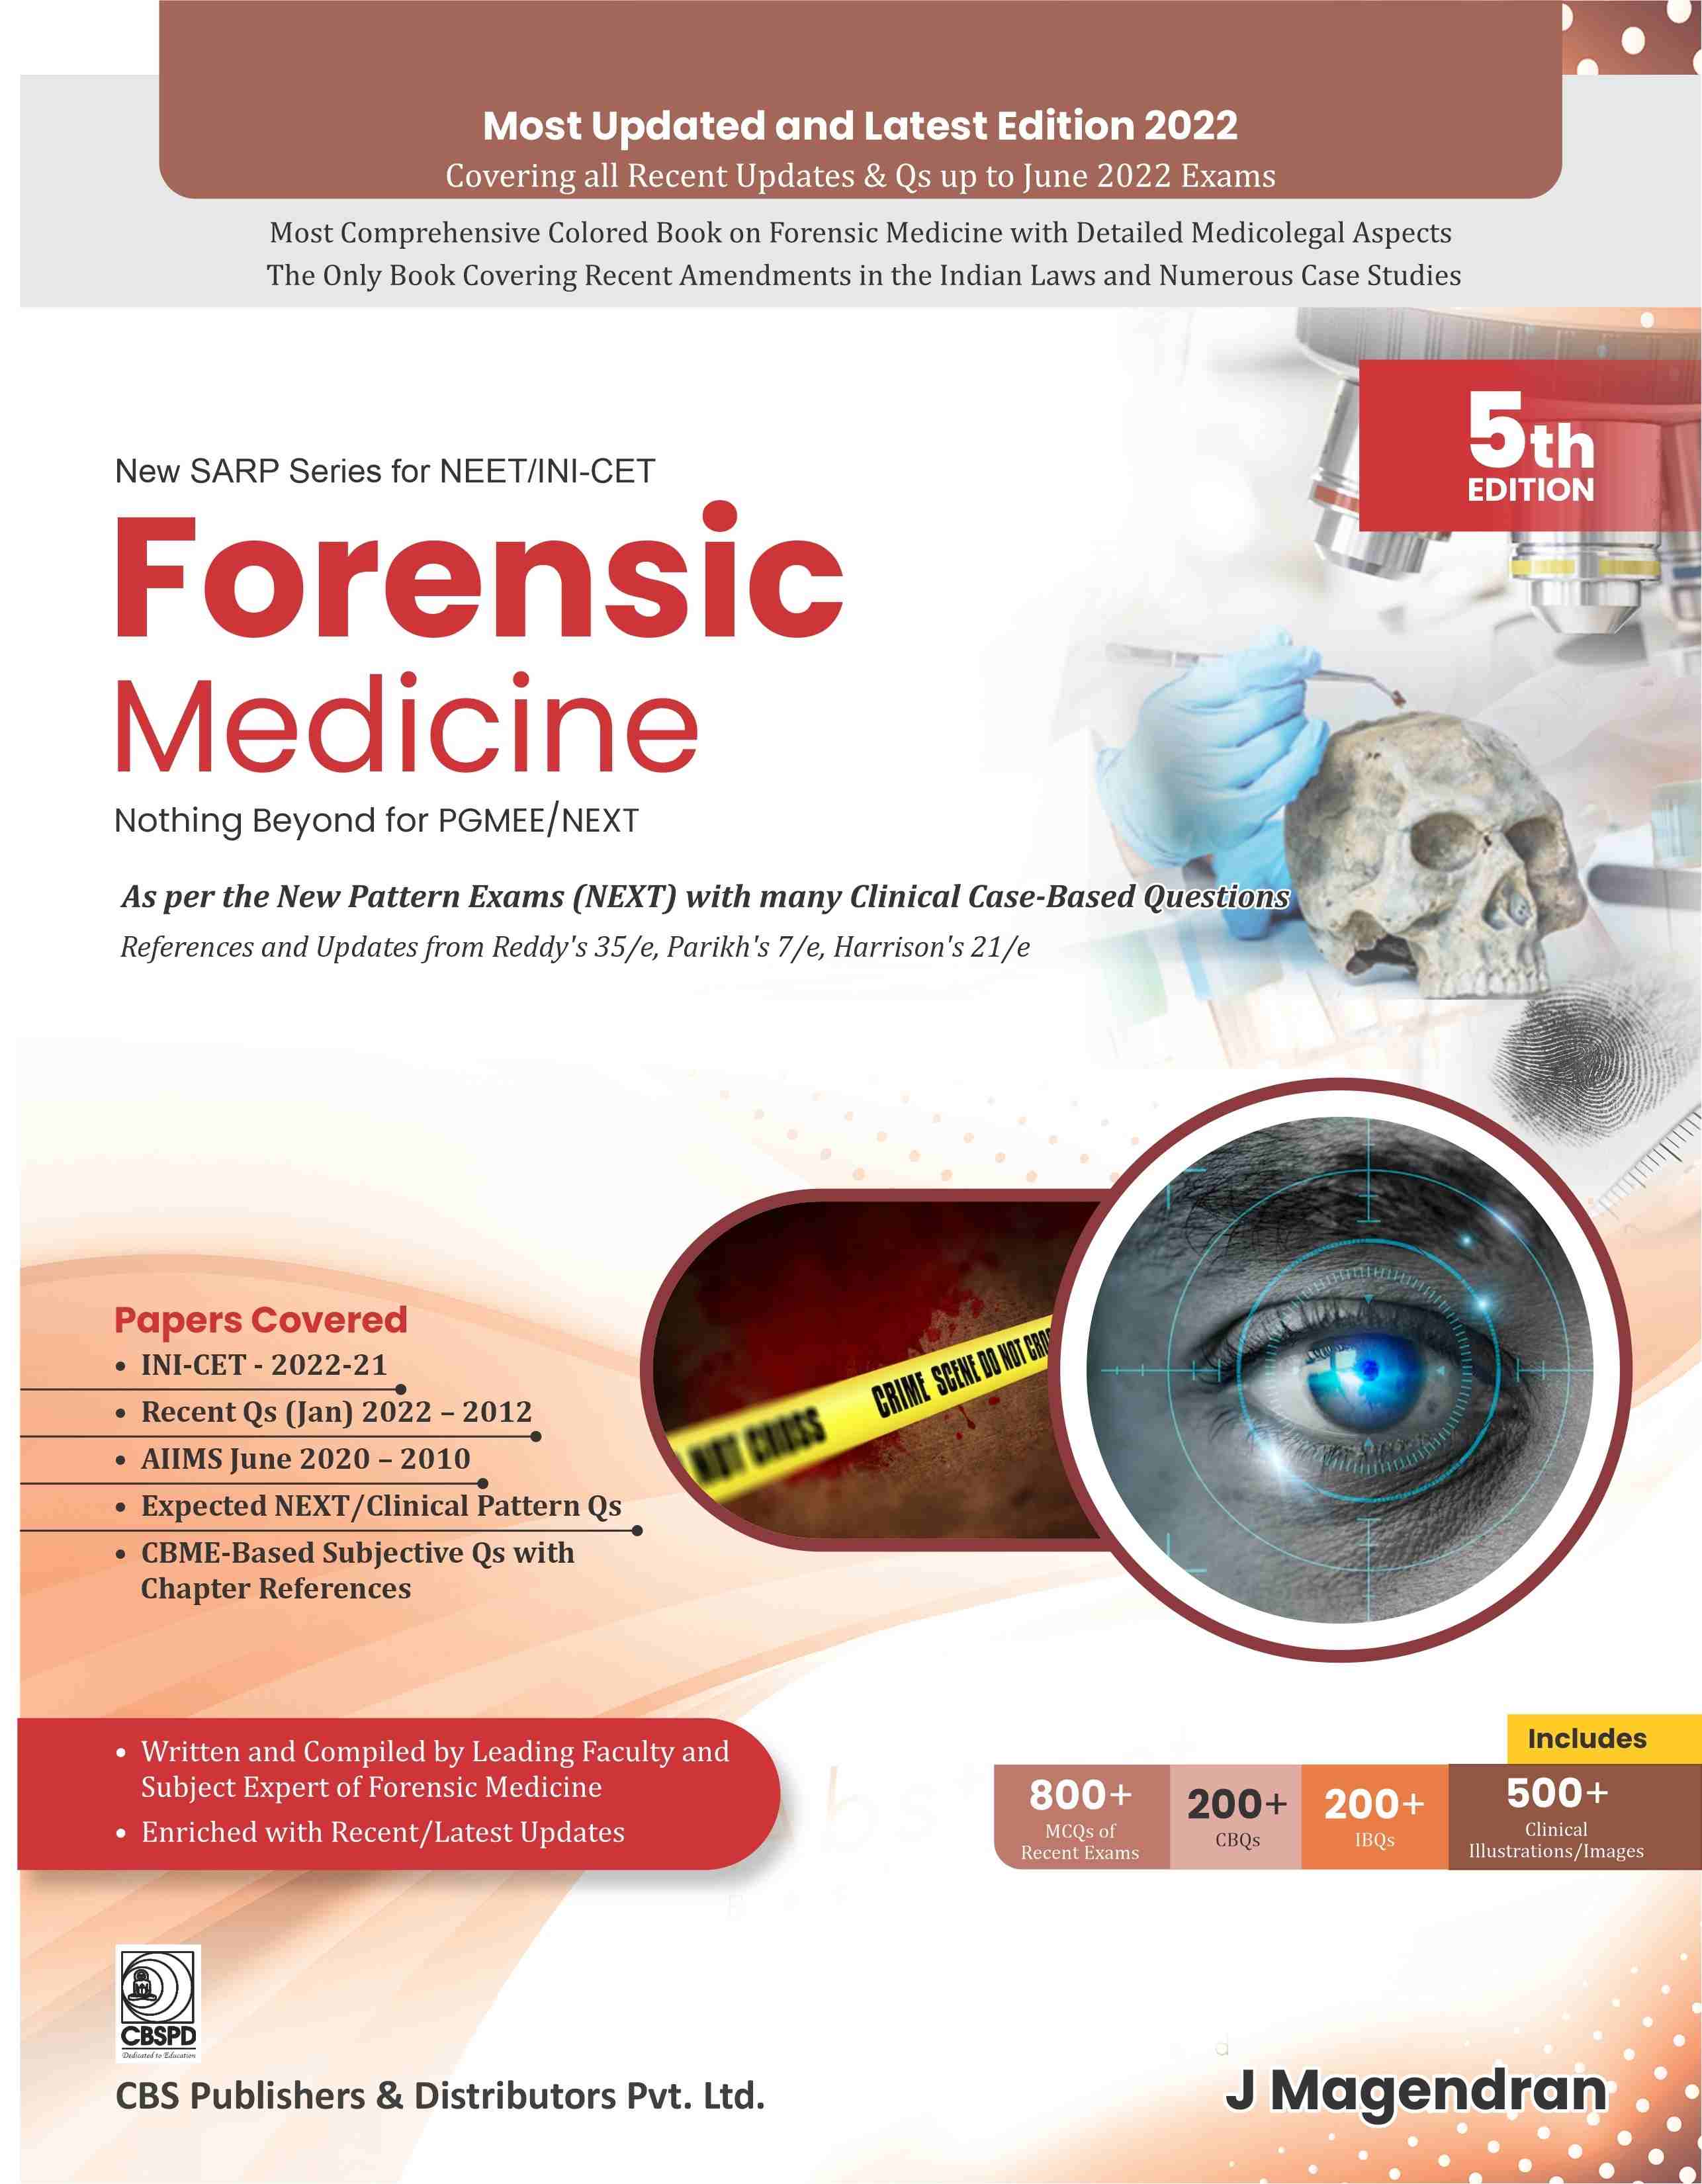 

best-sellers/cbs/new-sarp-series-for-neet-nbe-ai-forensic-medicine-nothing-beyond-for-pgmee-5ed-pb-2022--9789394525016